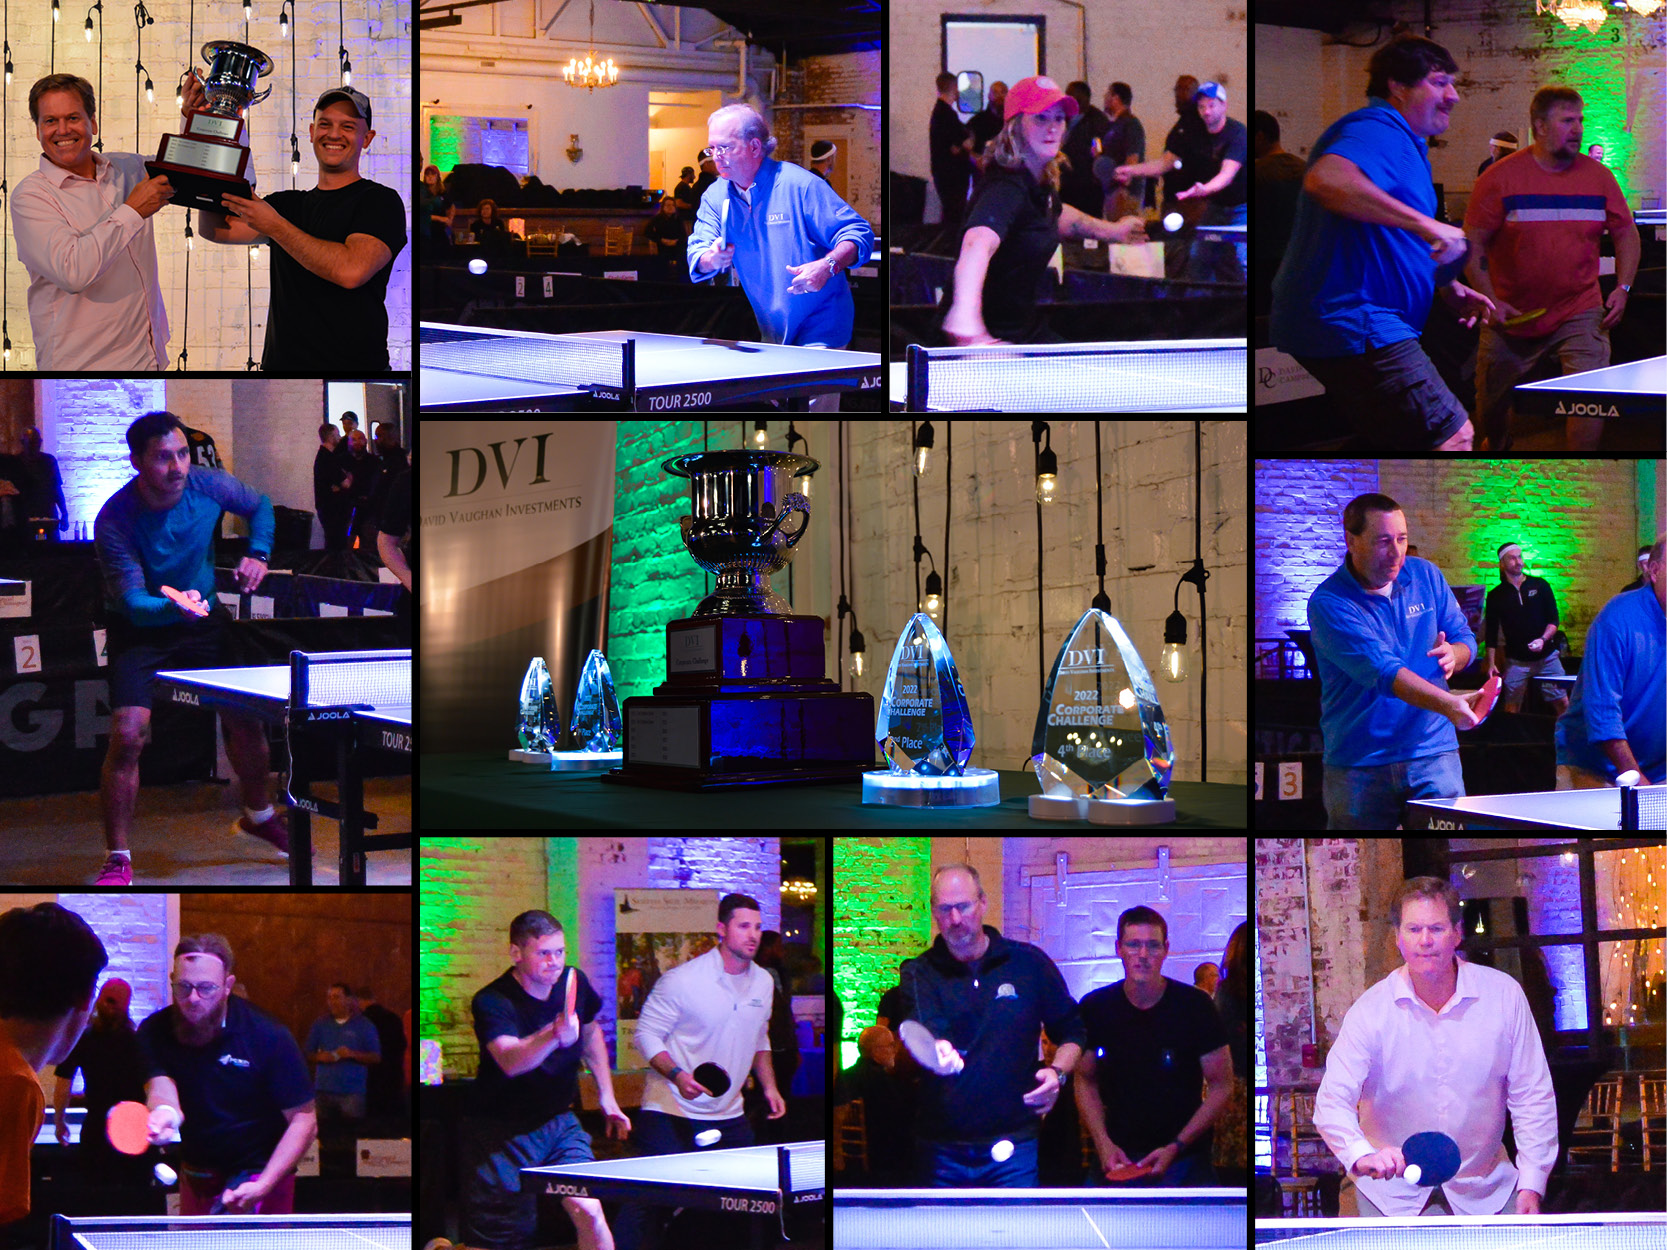 A collage of 10 ping pong action shots surrounding a photo of the trophies the winners are destined to bring home